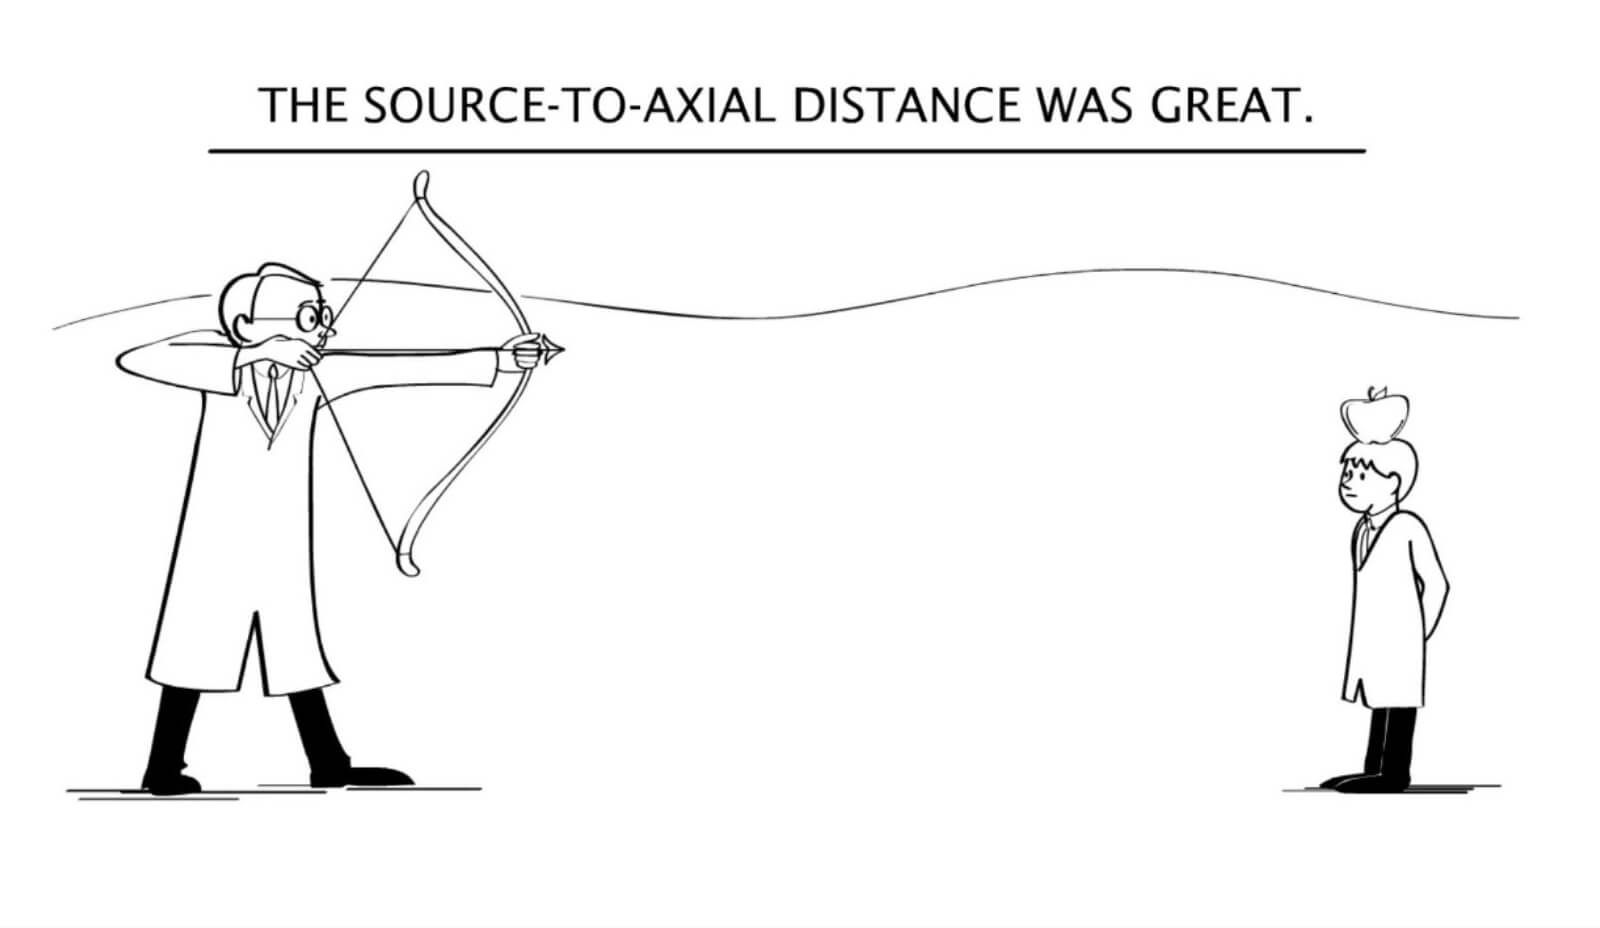 The source-to-axial distance was great. (Imagine someone aiming an arrow at the apple.)